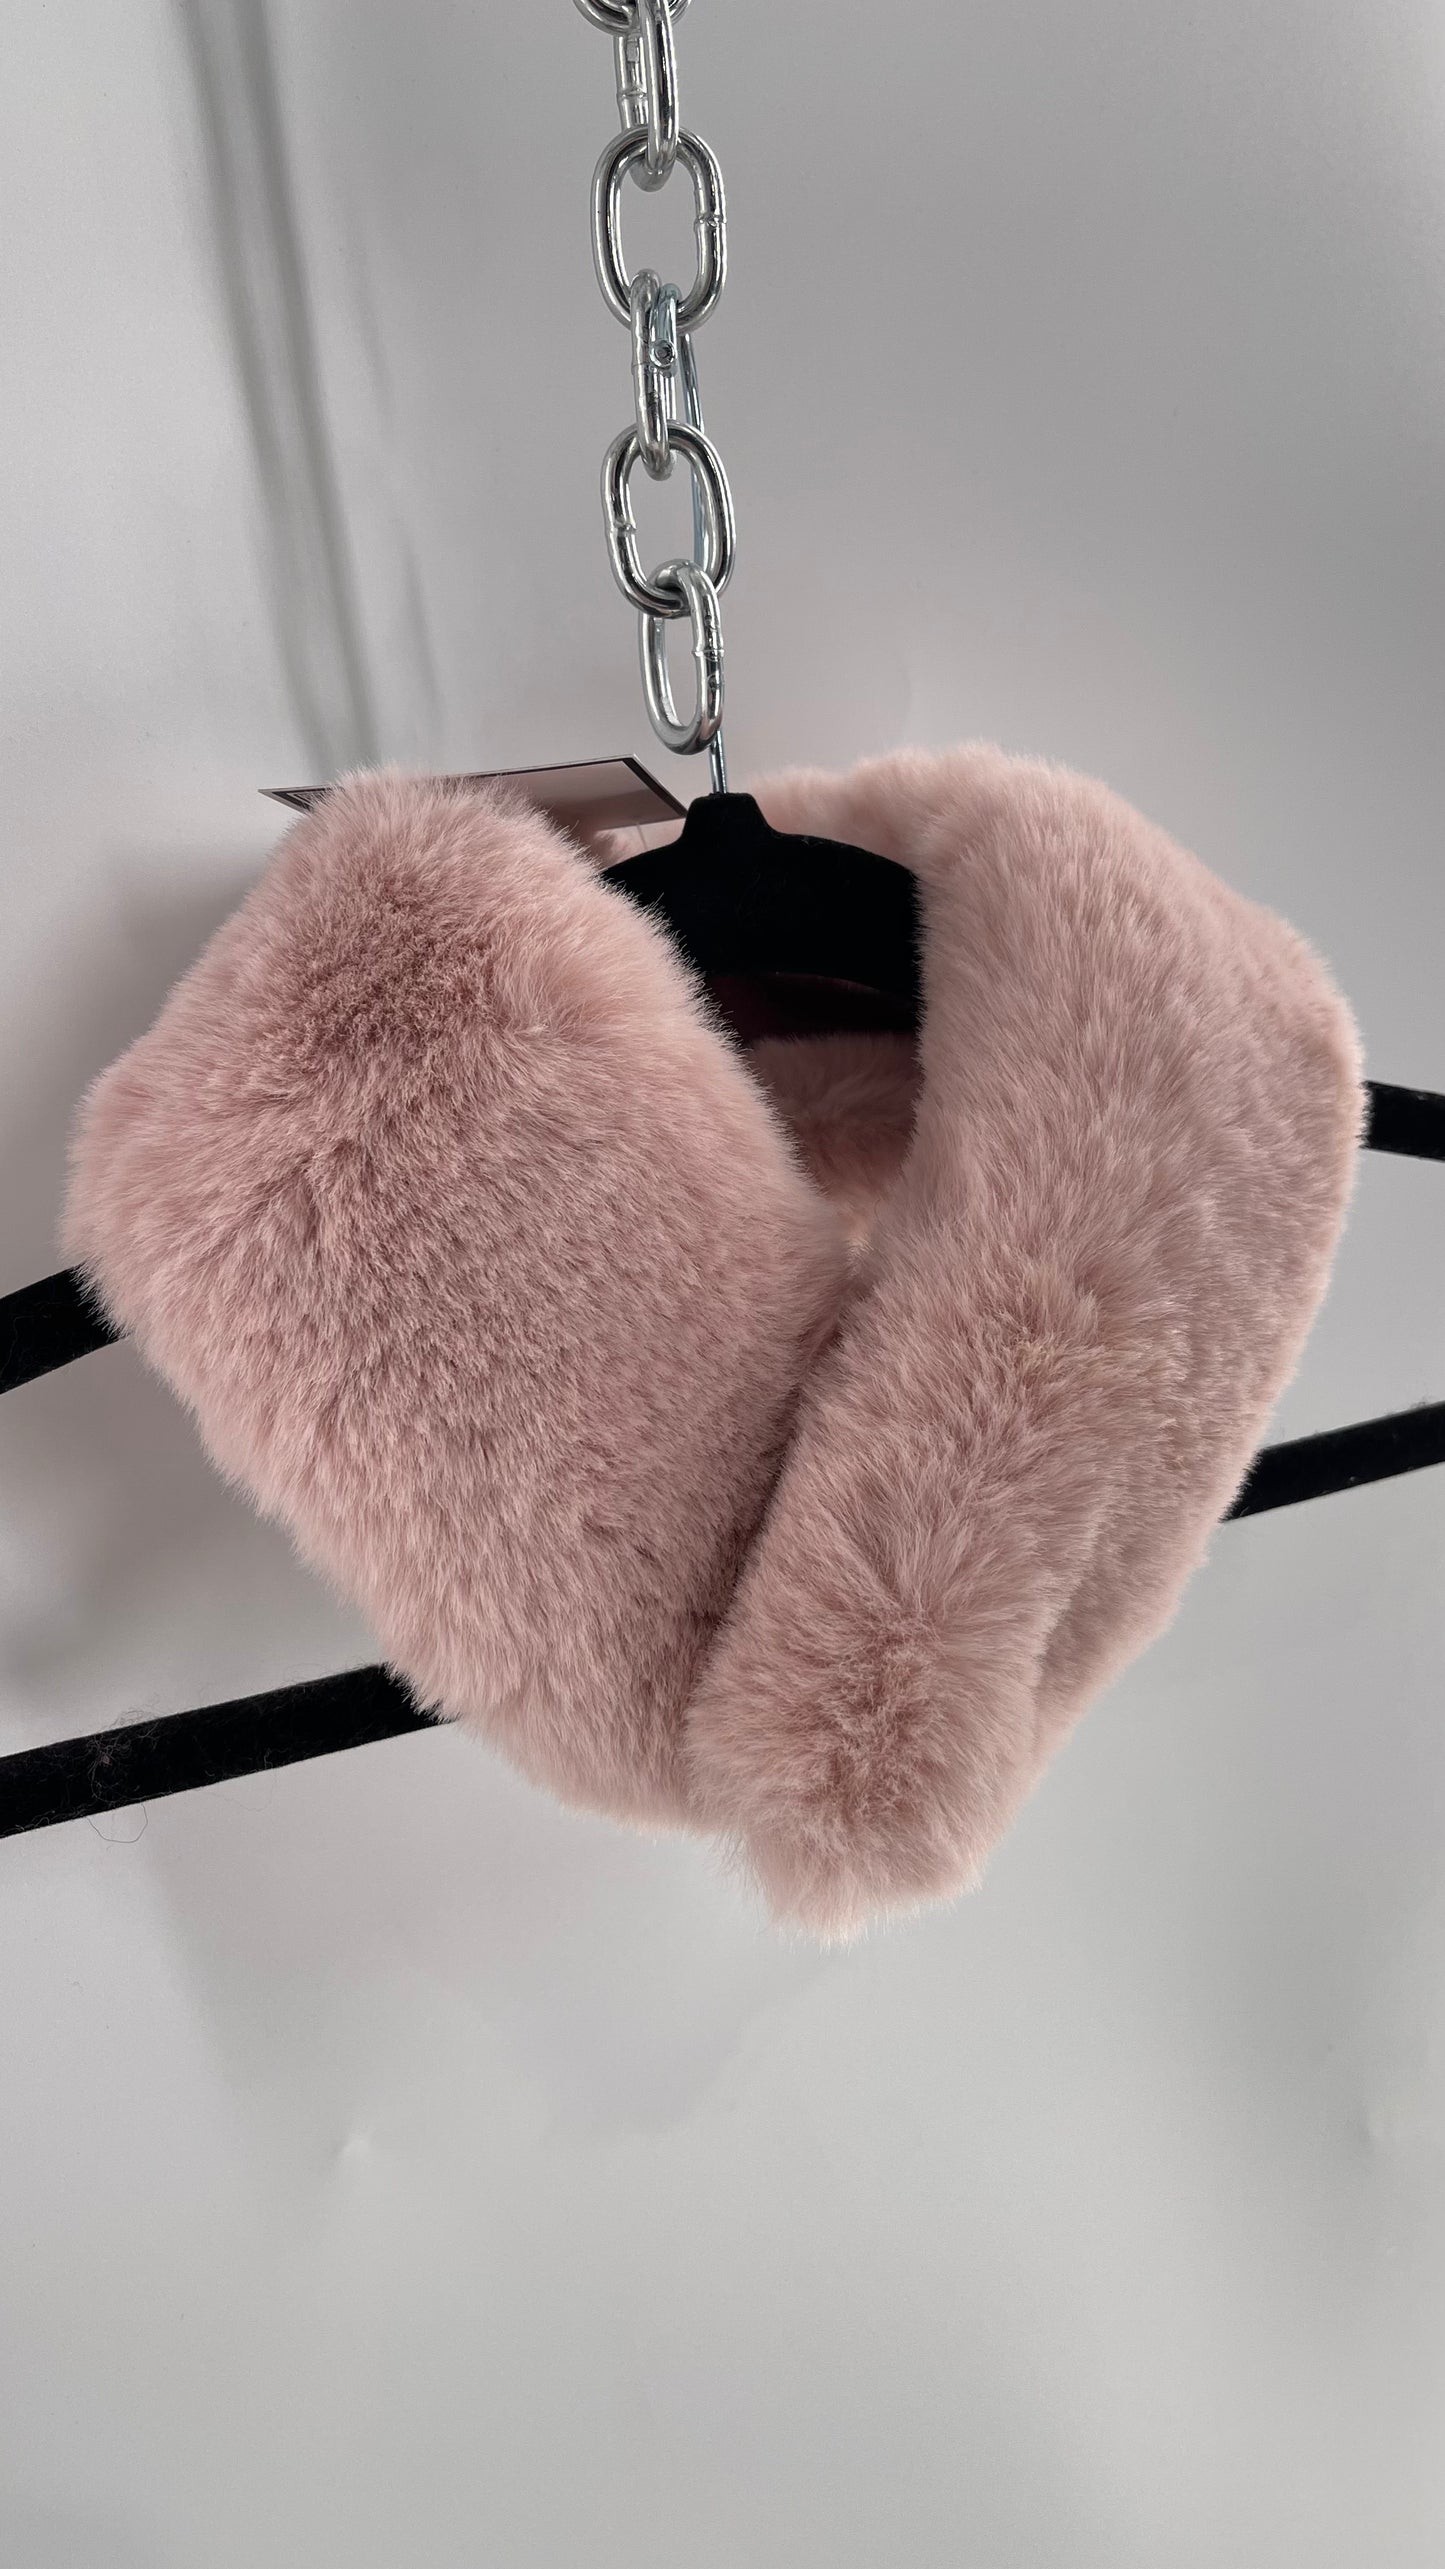 Muted Pink Fur Collar/Neck Warmer with Velvet Lining